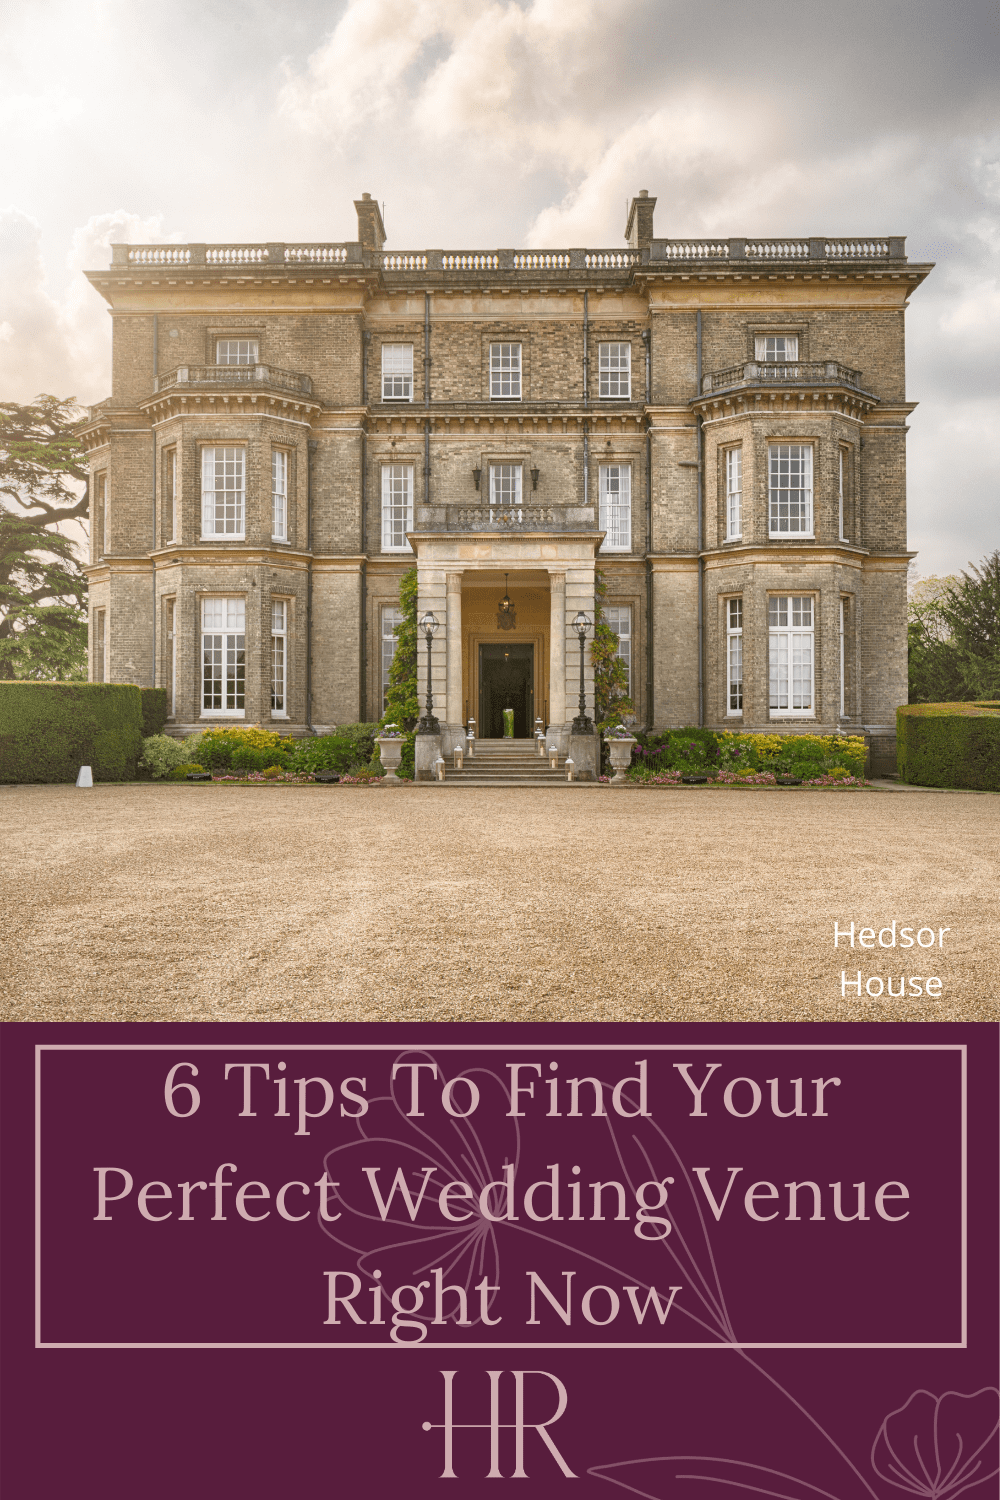 Find A Wedding Venue With These 6 Tips